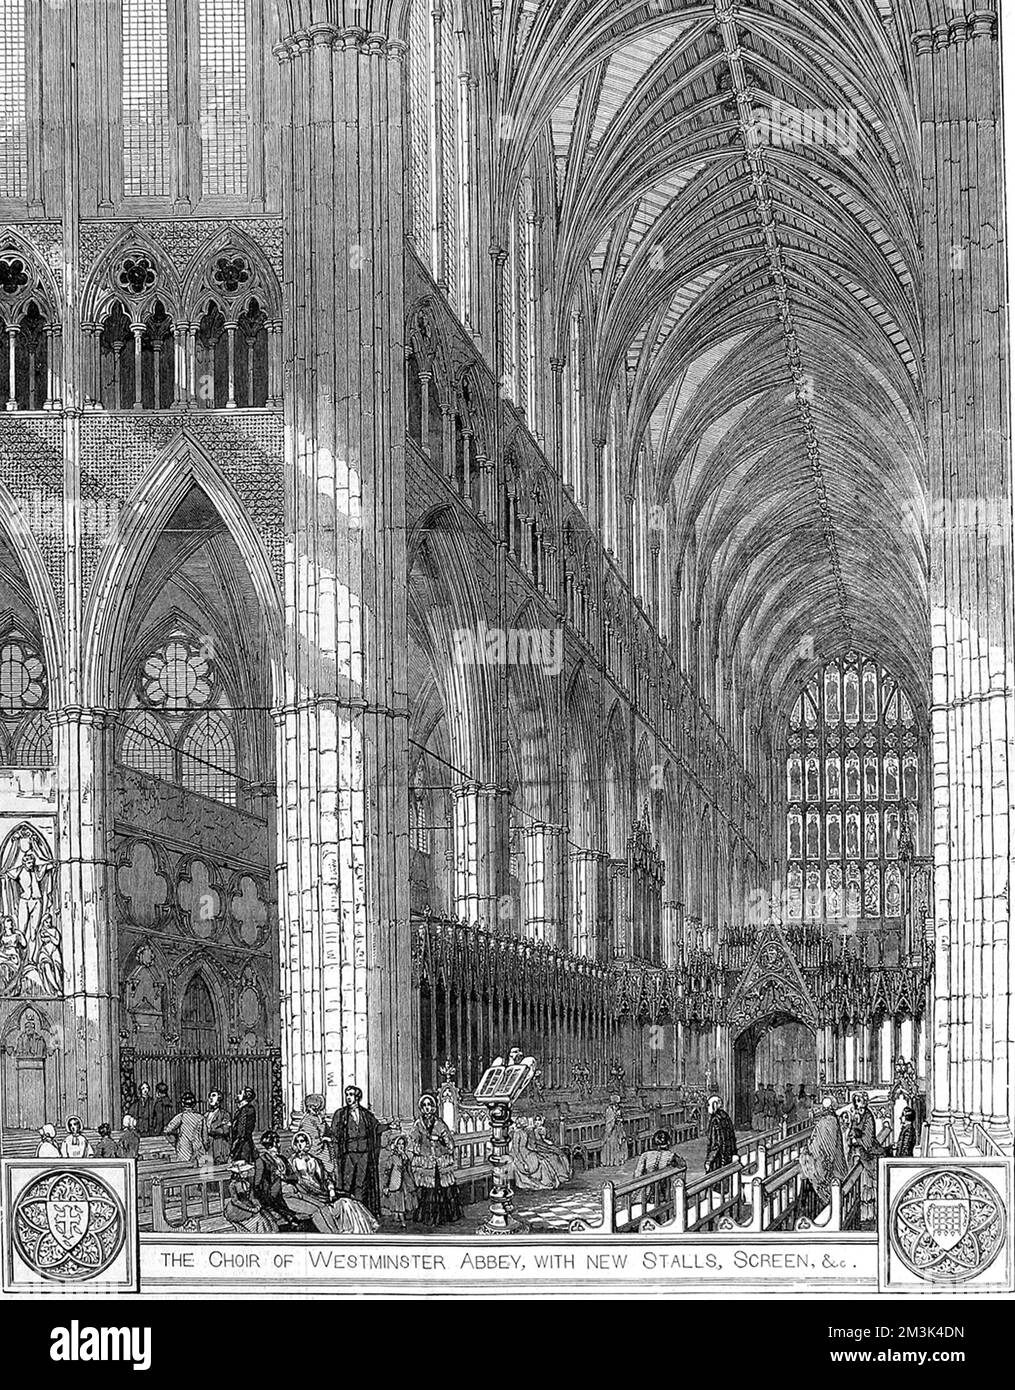 The choir of Westminster Abbey, with a lecturn in the foreground and the screen on the right. Stock Photo